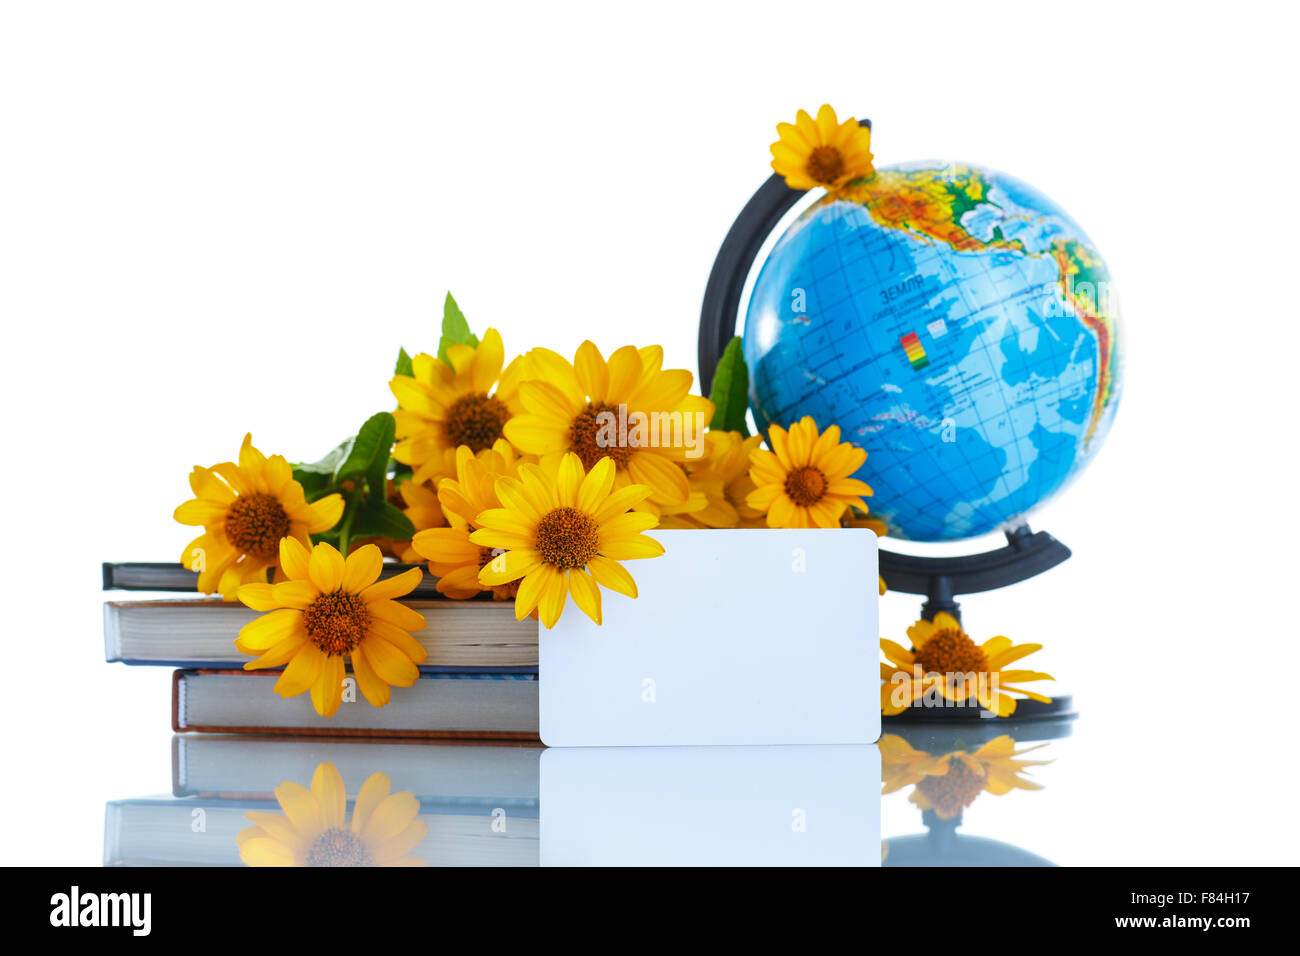 Globe with books and flowers Stock Photo